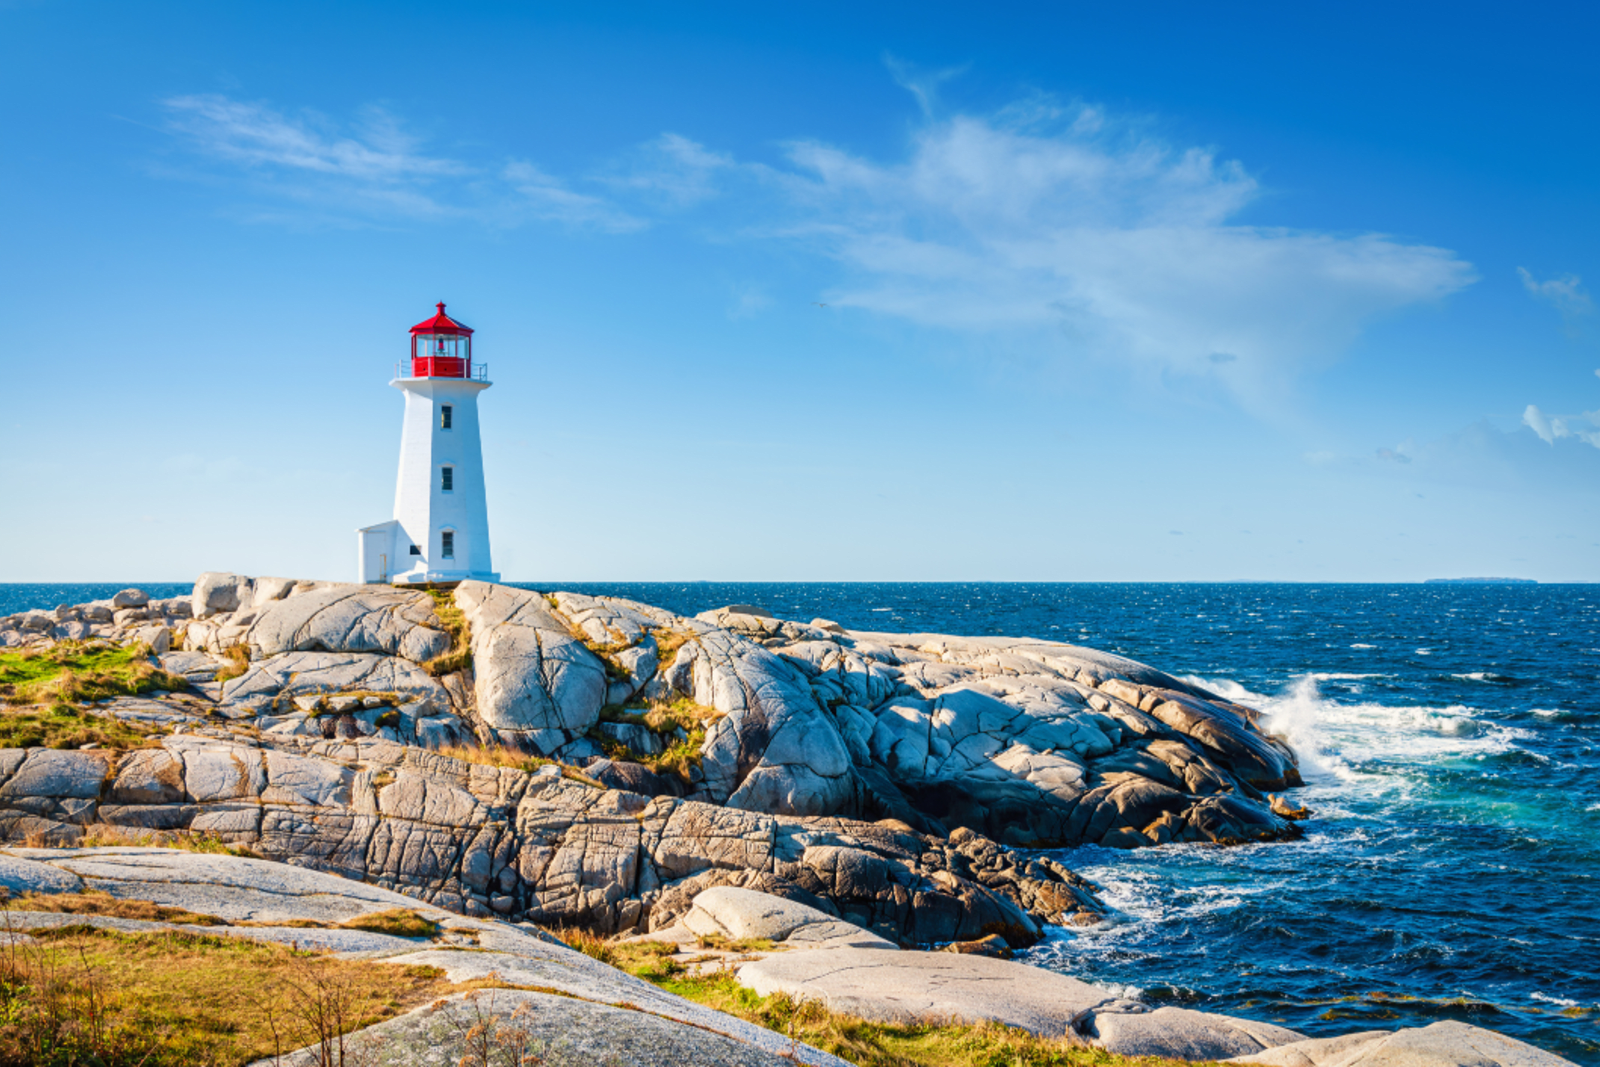 The lighthouse at Peggy's Cove, near Halifax